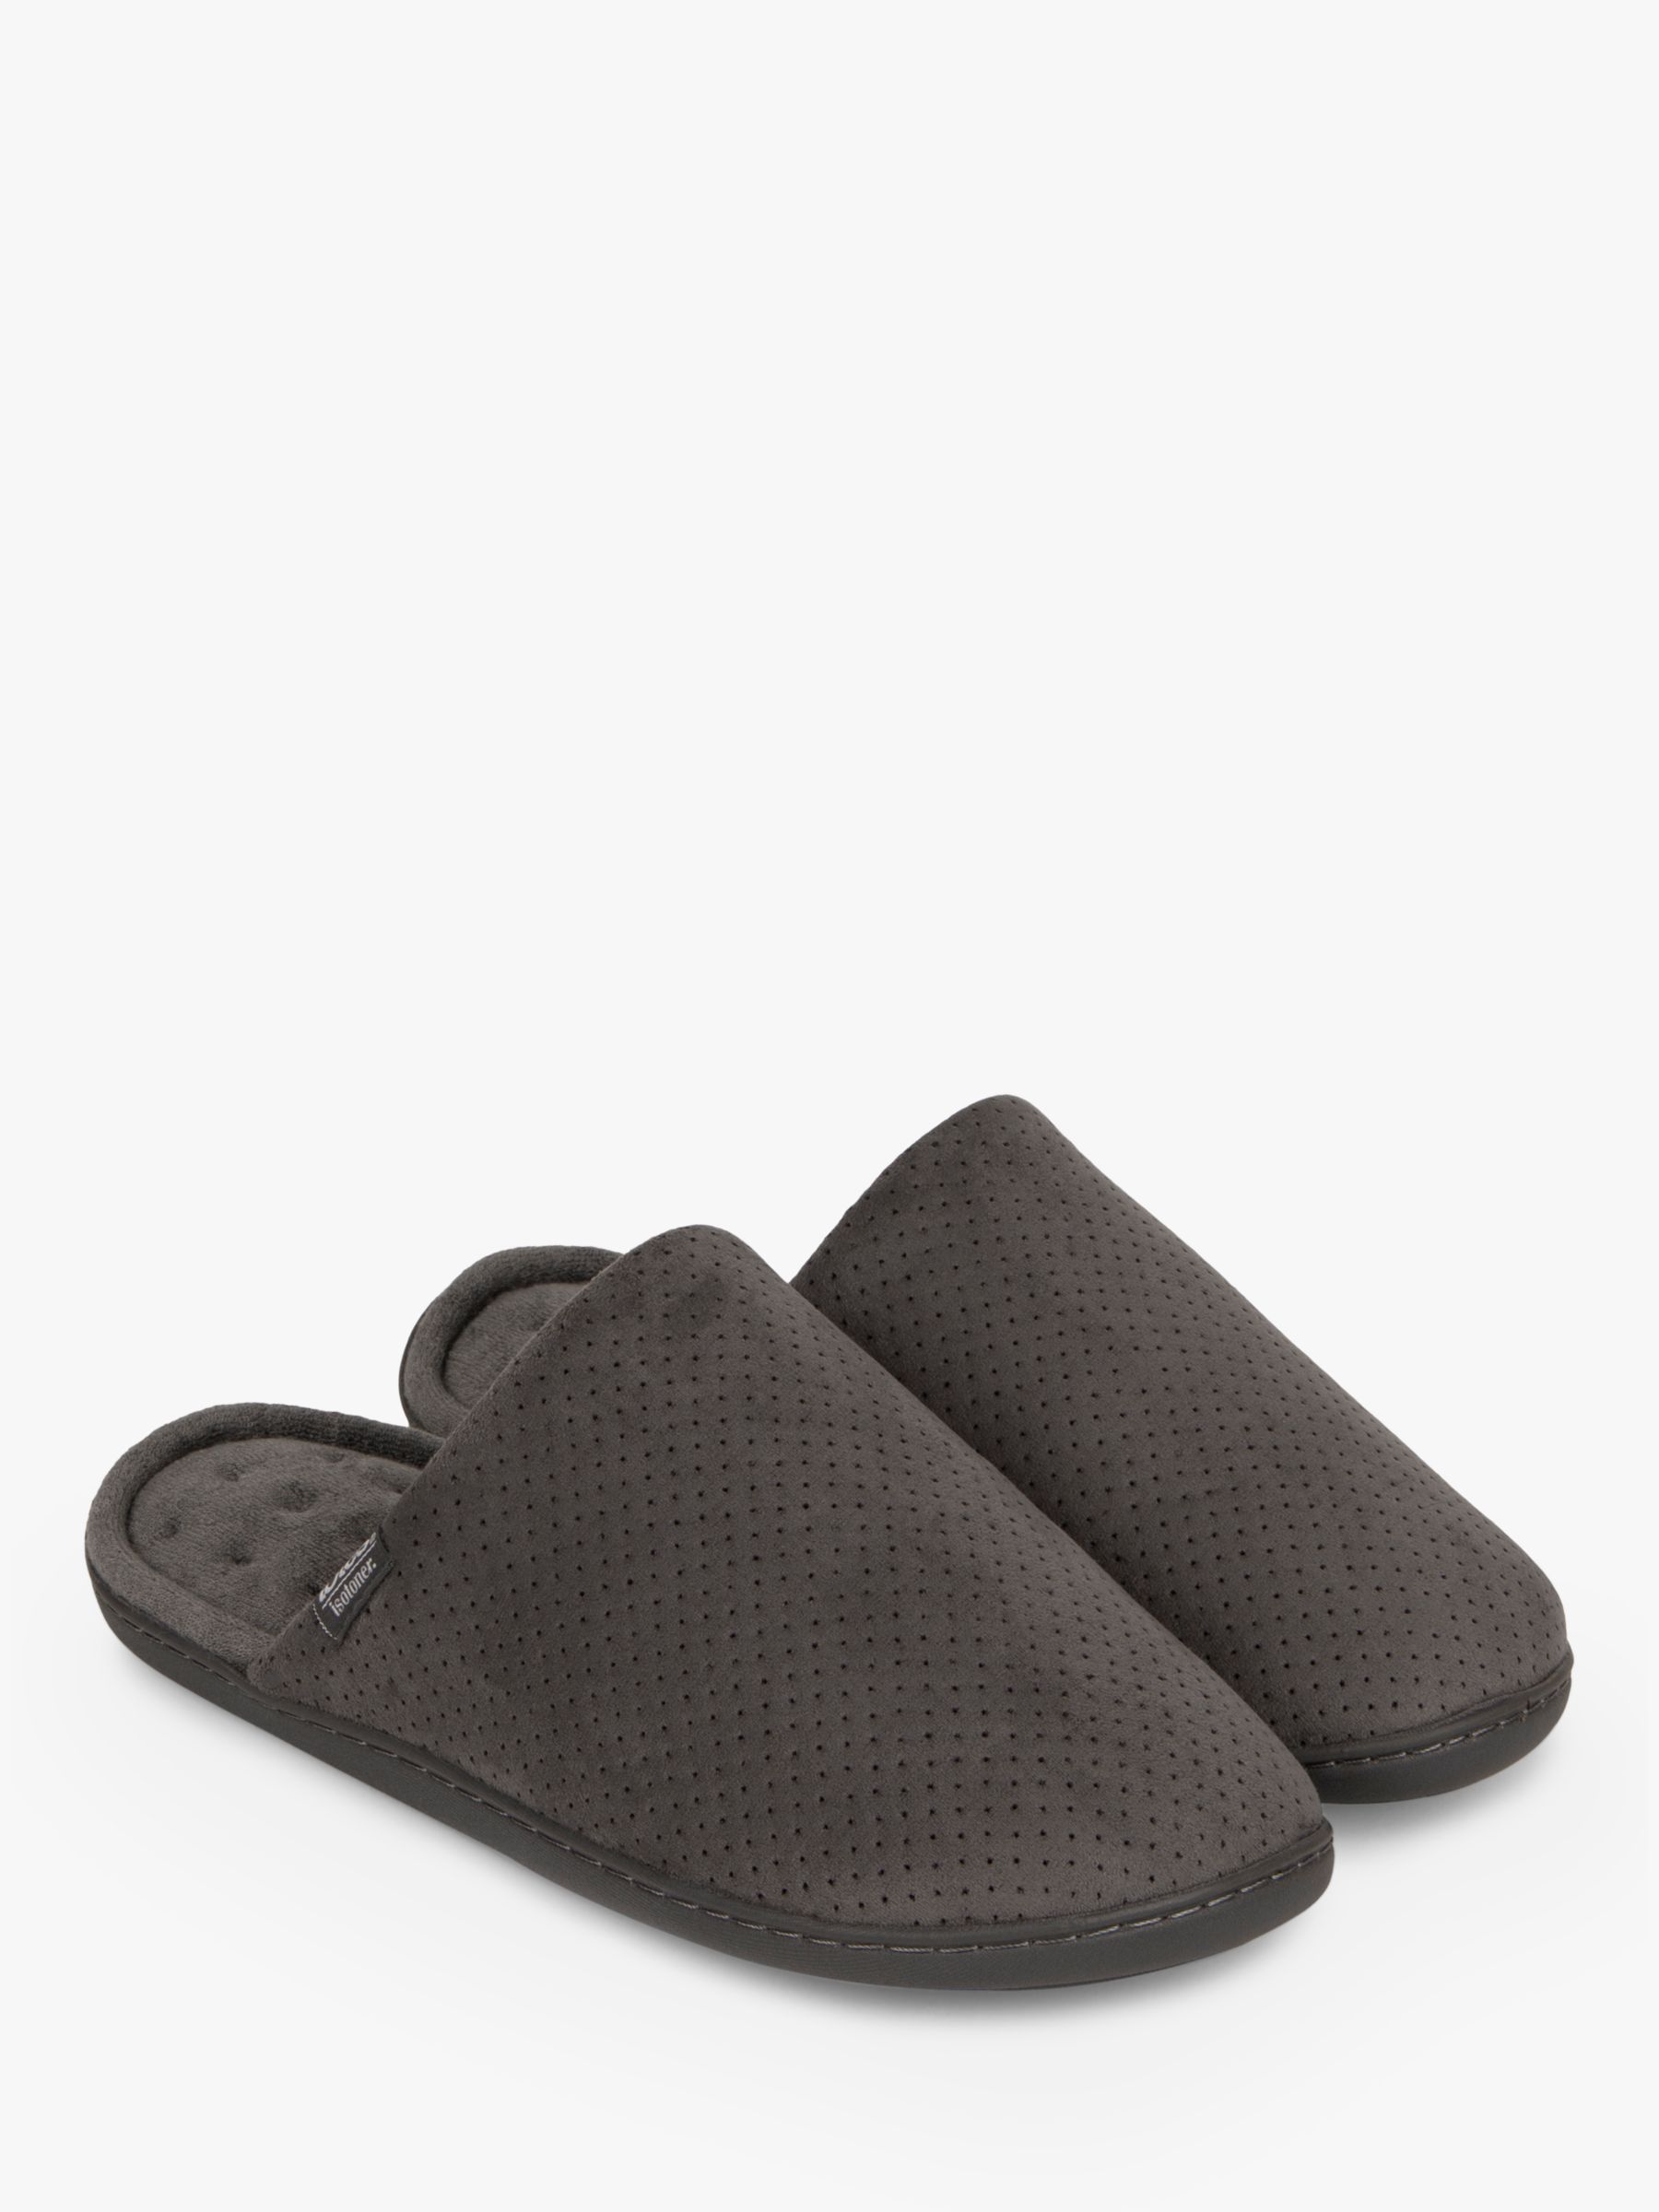 totes Airtex Suedette Mule Slippers, Grey, 8